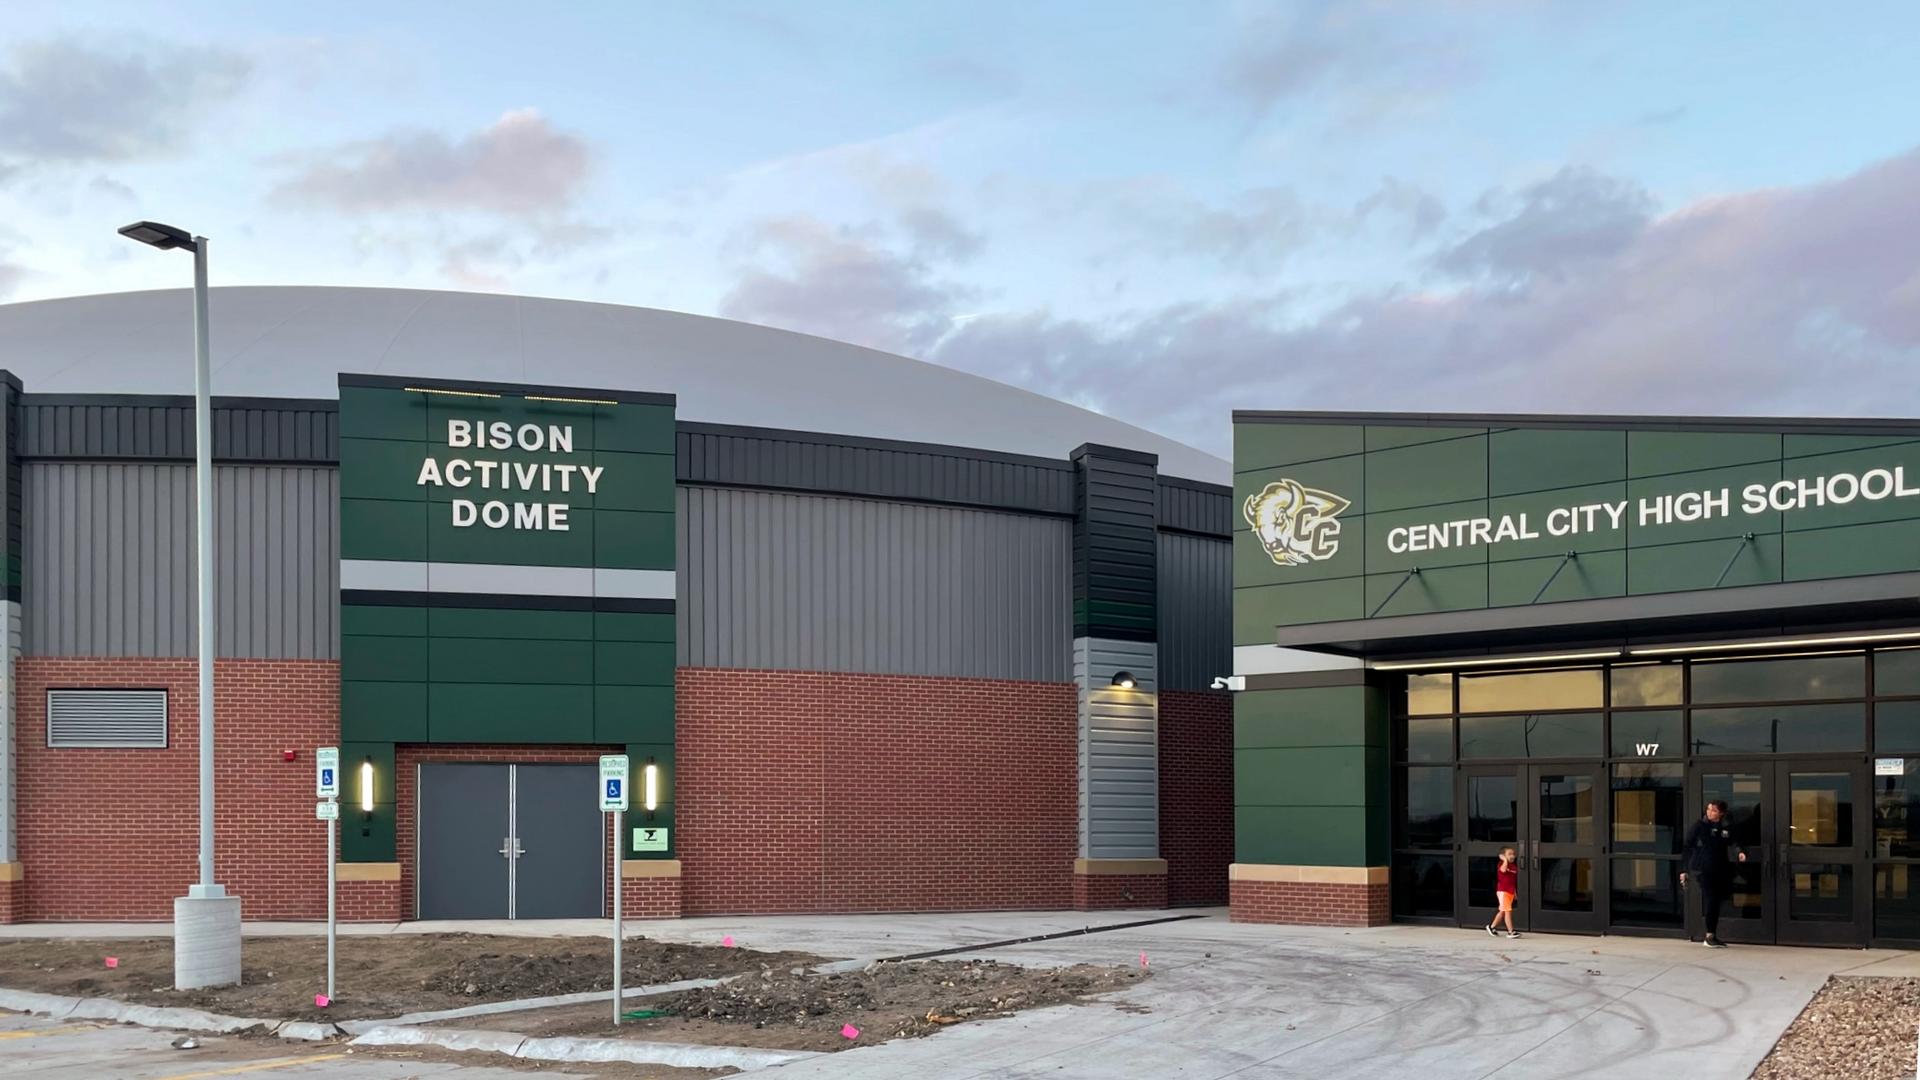 Main entrance to the Bison Activity Dome.